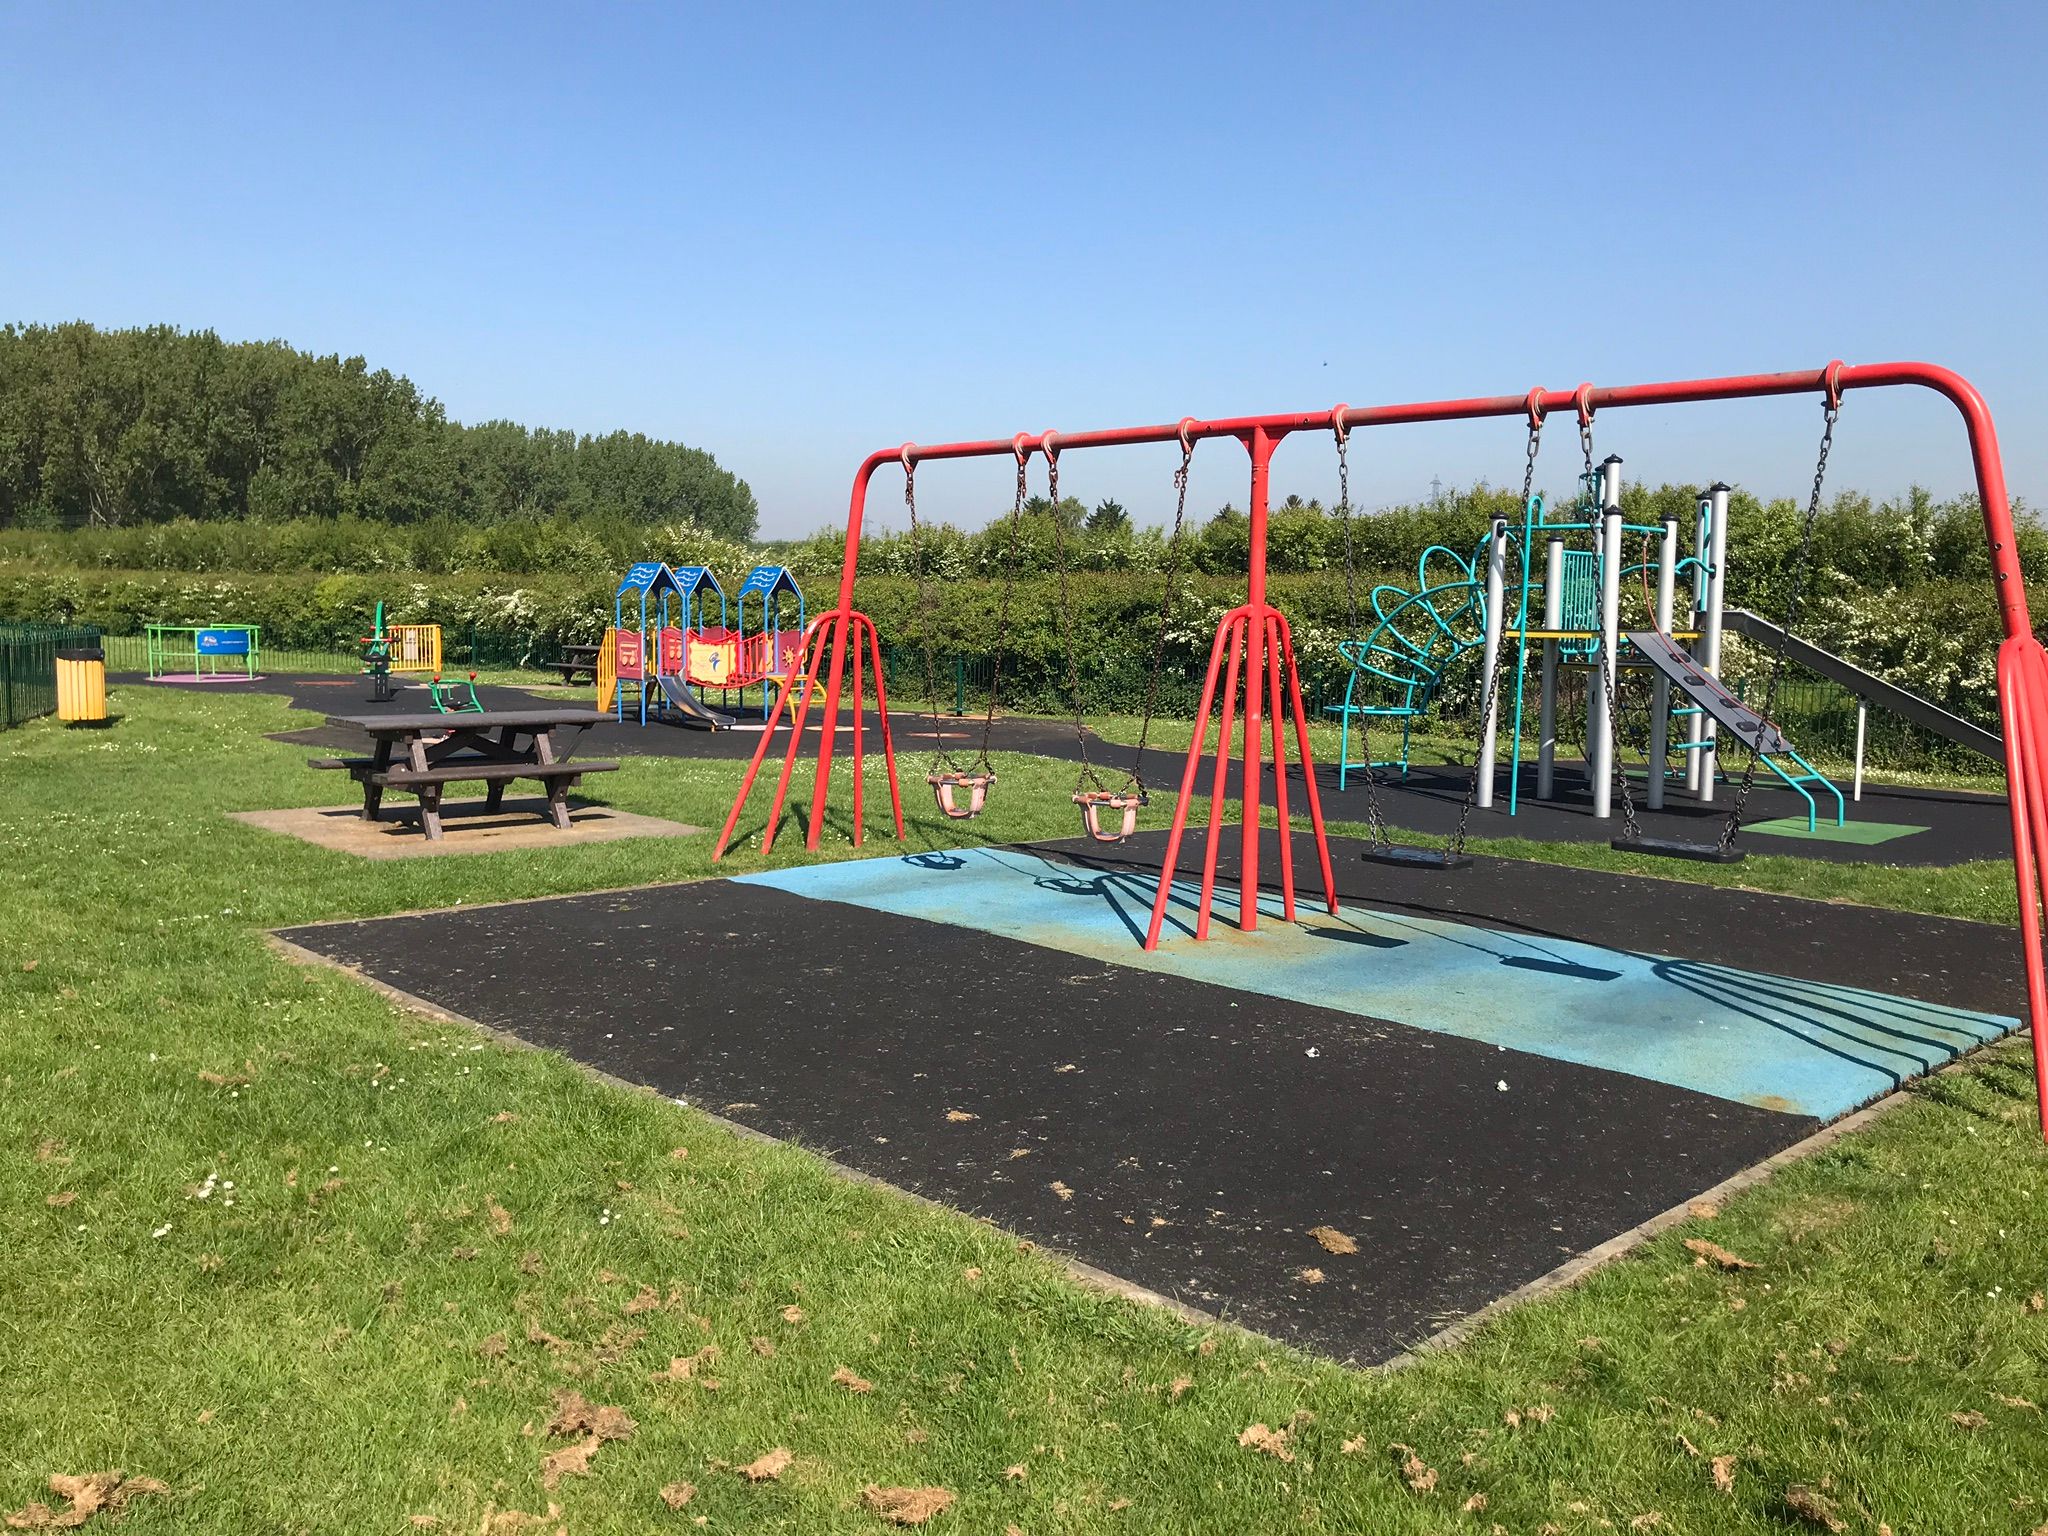 Gated play area with swings and climbing frames.